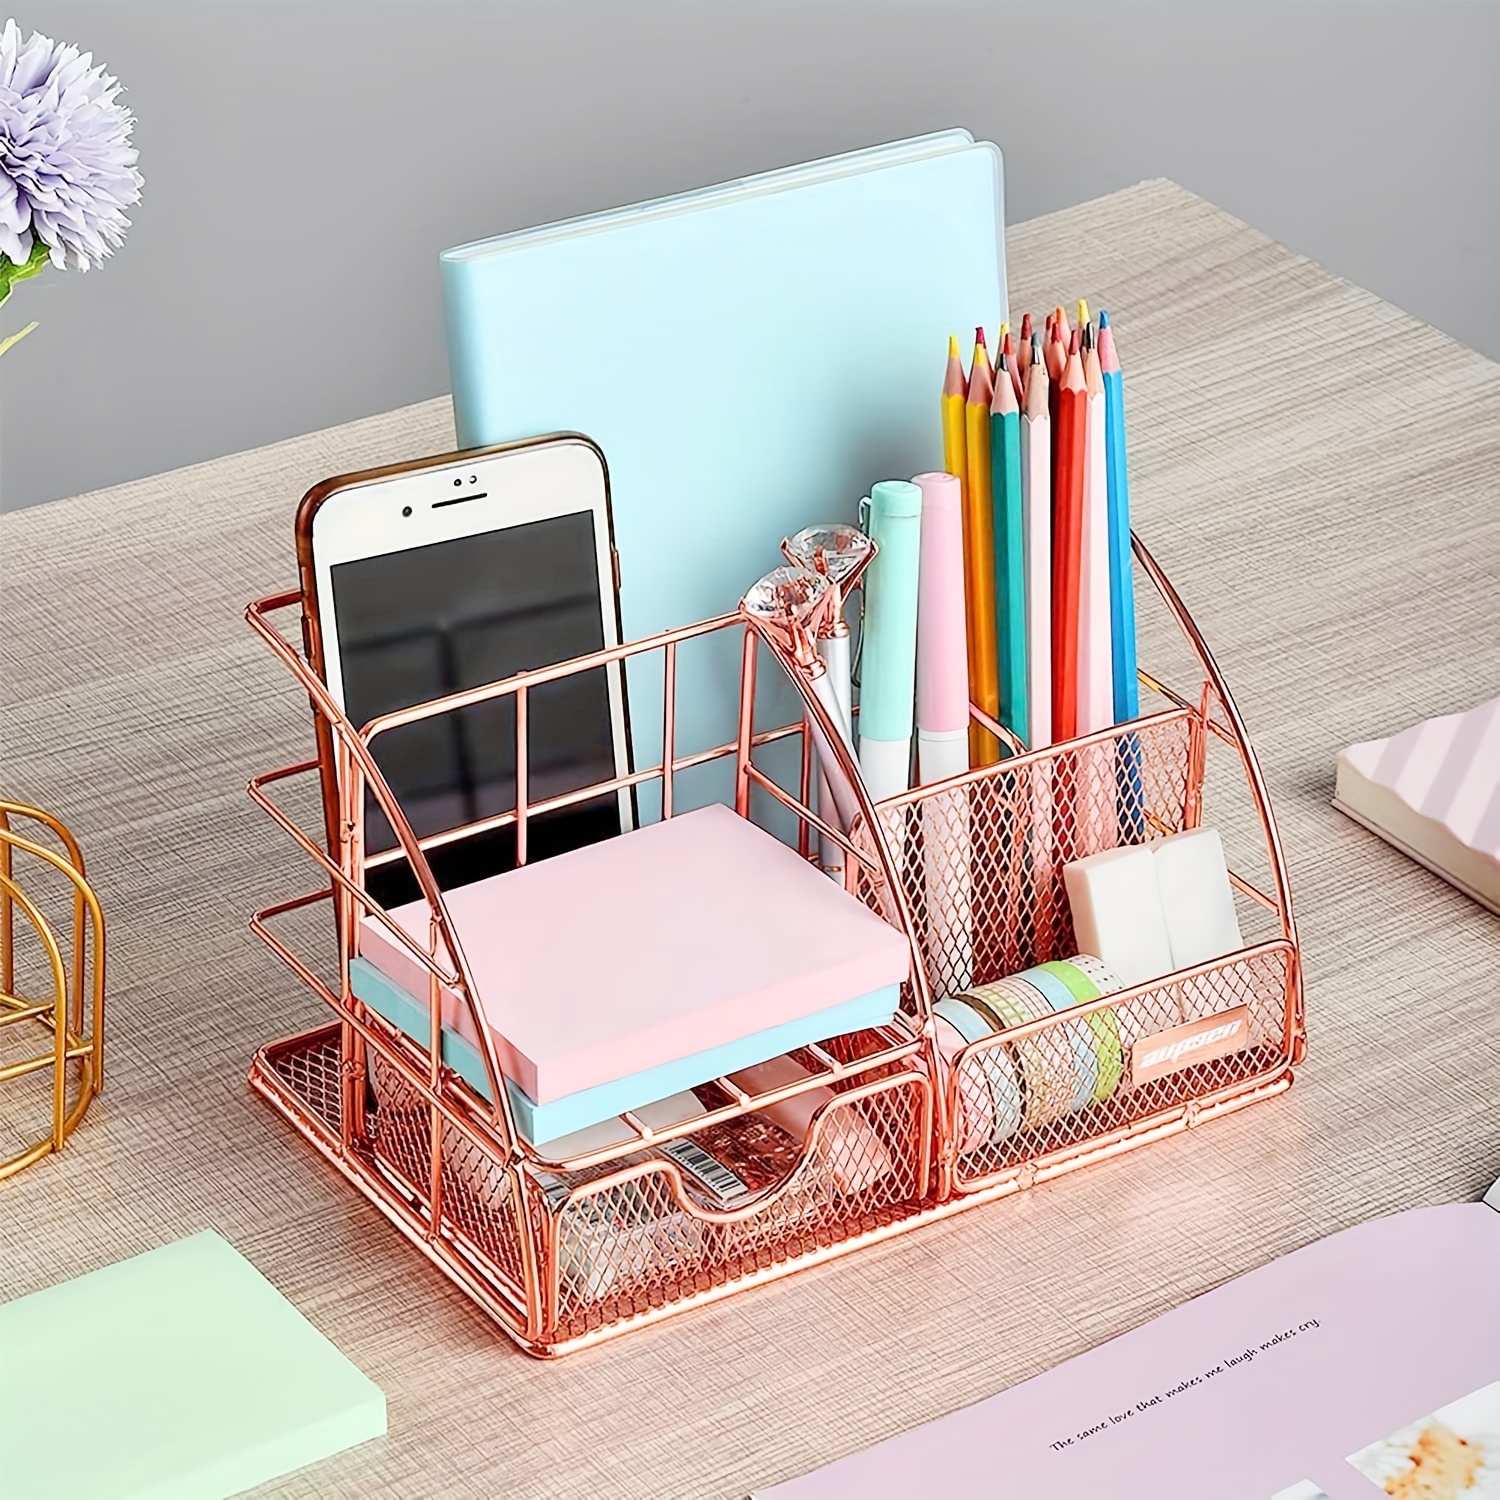 Desk Organizers and Accessories, Office Supplies Desk Organizer Caddy with 7 Compartments + Pen Holder / 72 Clips Set, Mesh Desk Organizer with Drawer